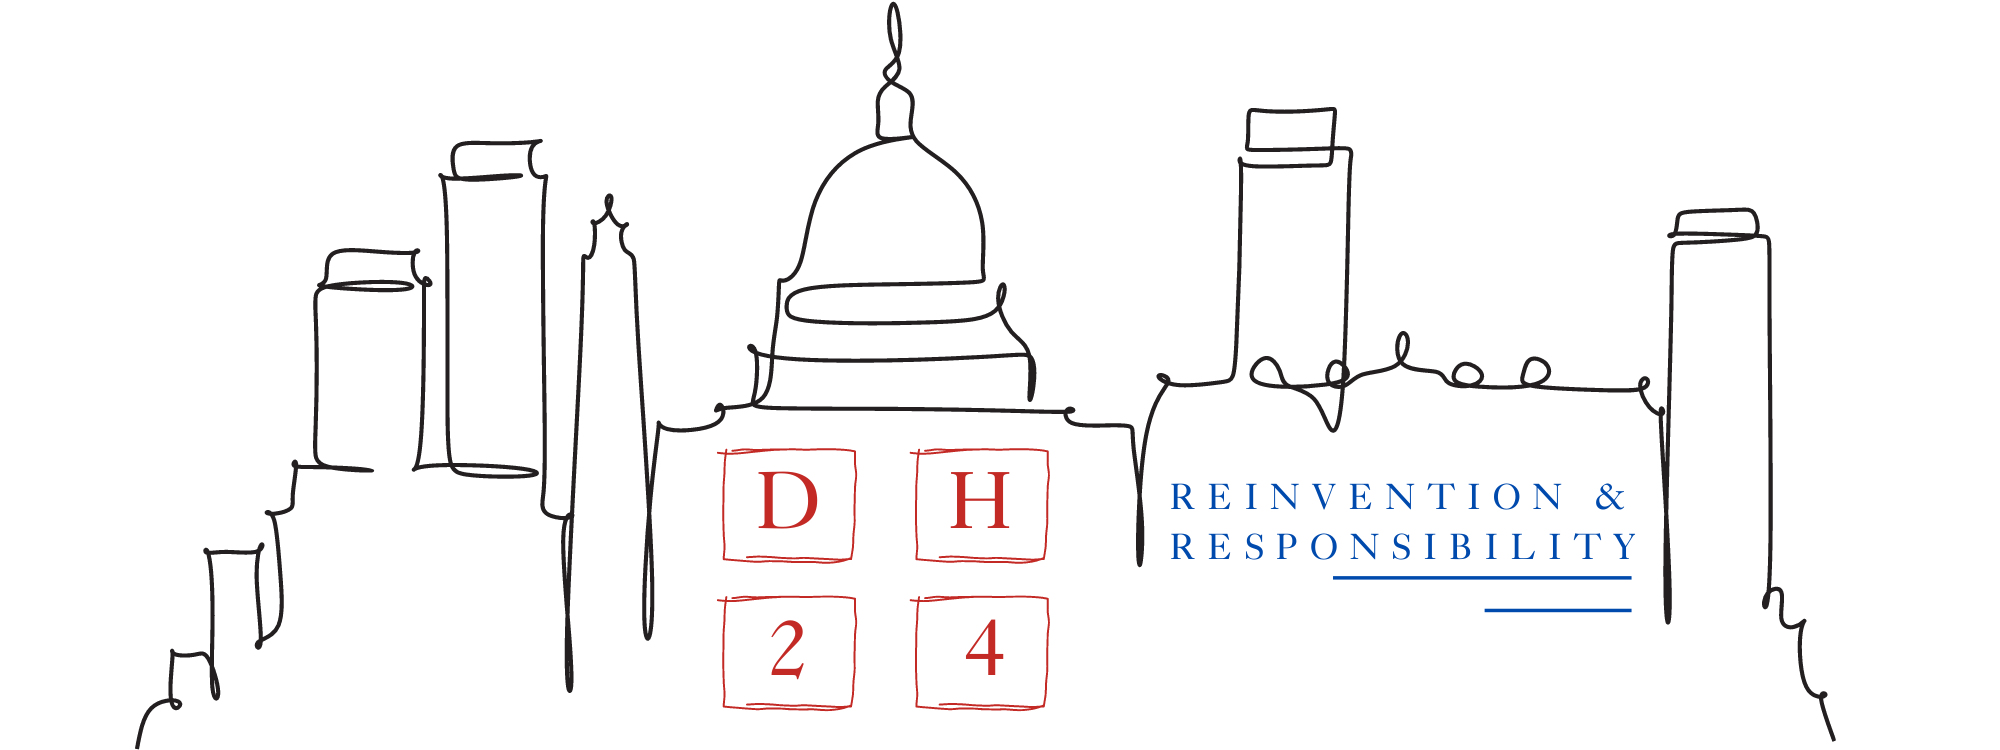 outline of DC skyline with four red squares, each with a letter reading DH24, and the blue text "Reinvention & Responsibility"